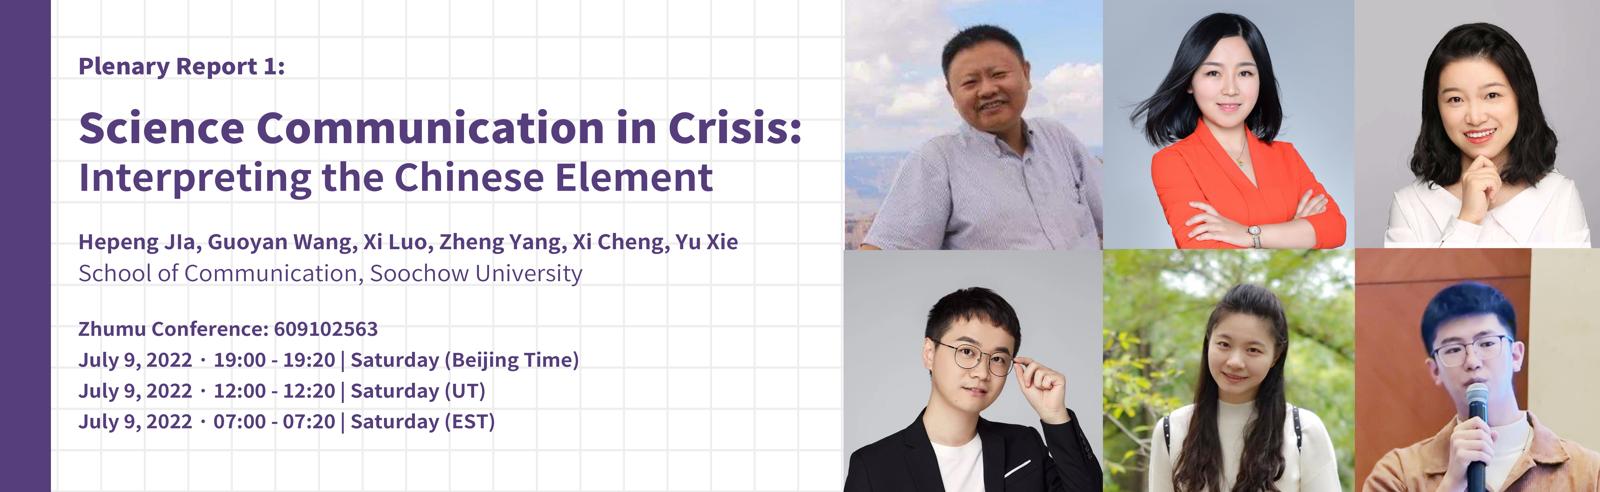 Plenary report 1: Science Communication in Crisis - Interpreting the Chinese Element